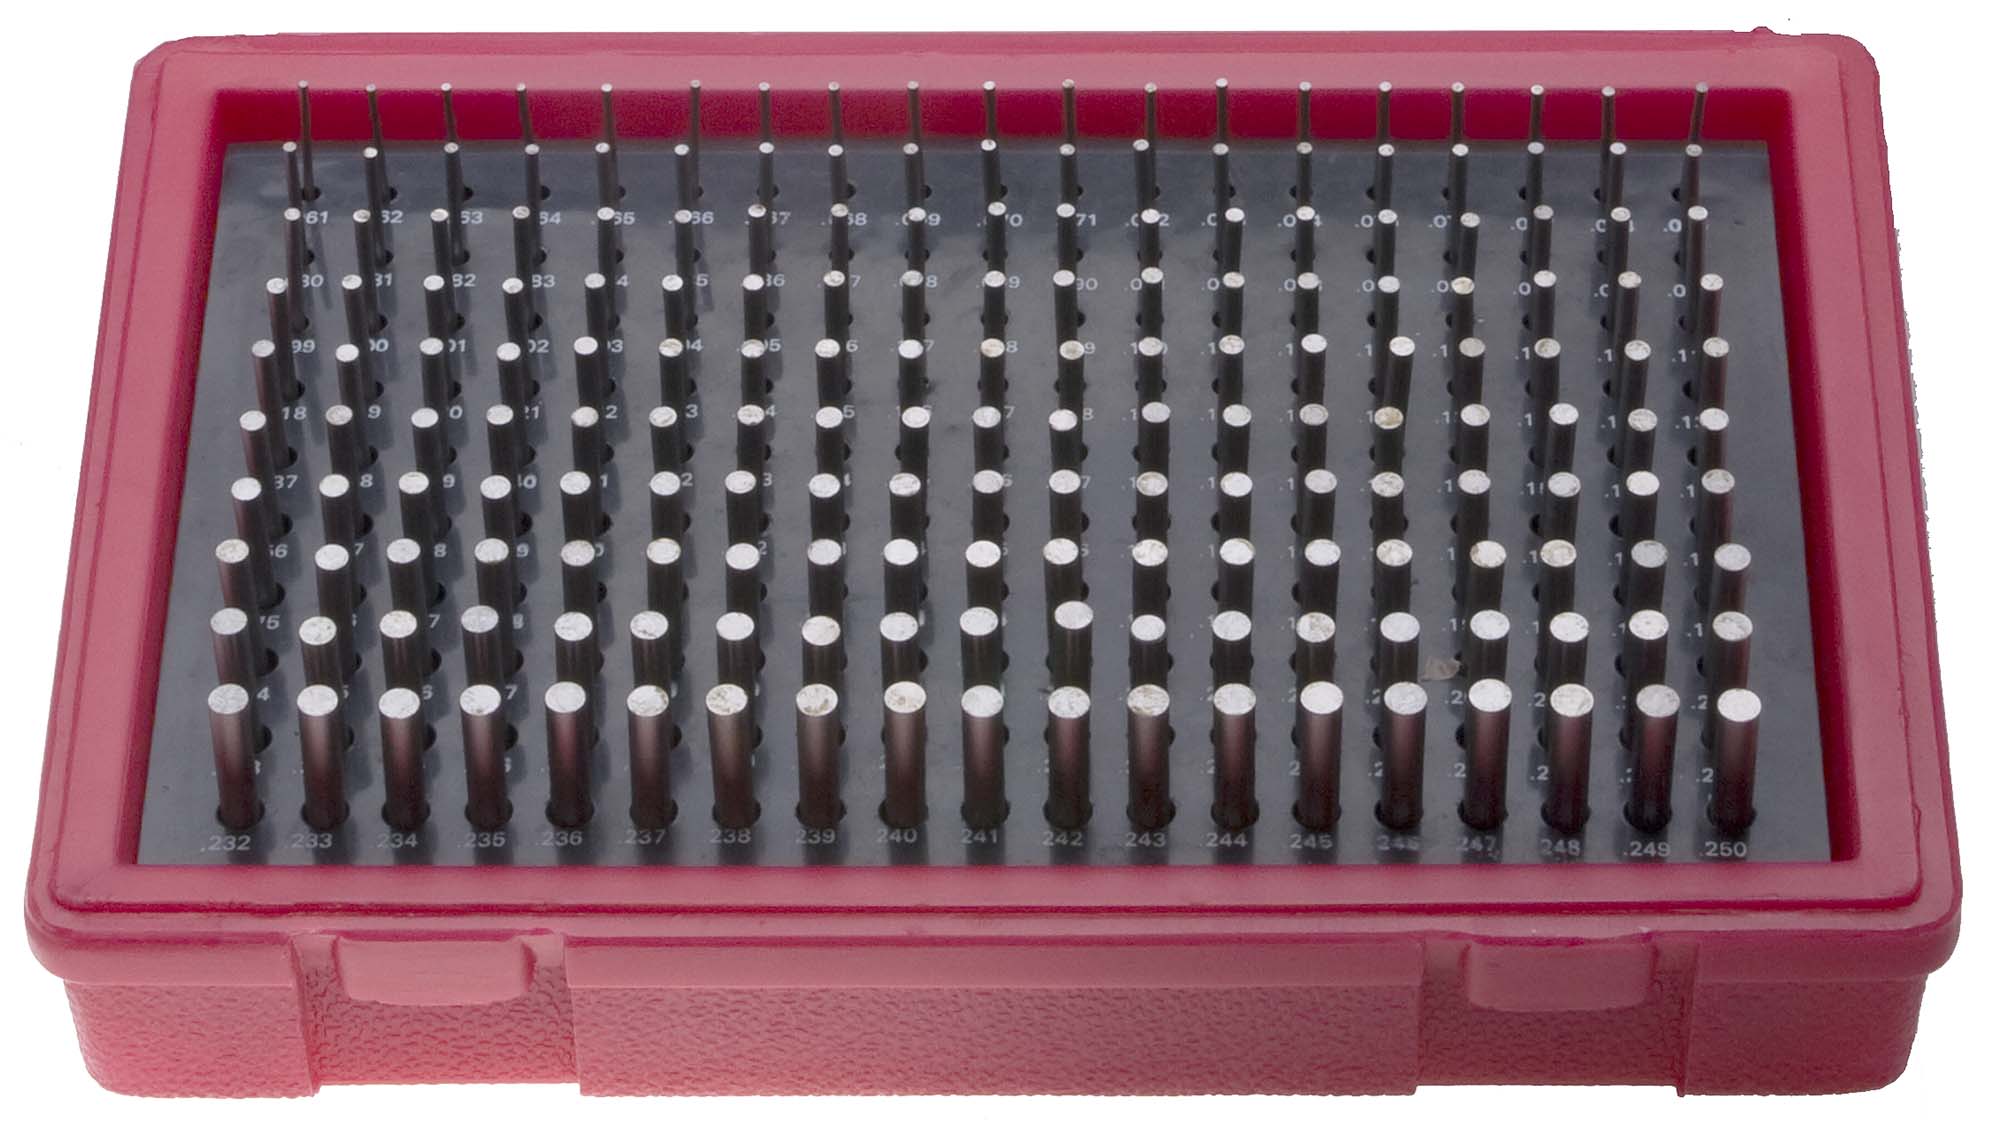 .20mm - 1.28mm by .02mm Minus Tolerance Pin Gage Set - 55 Gages